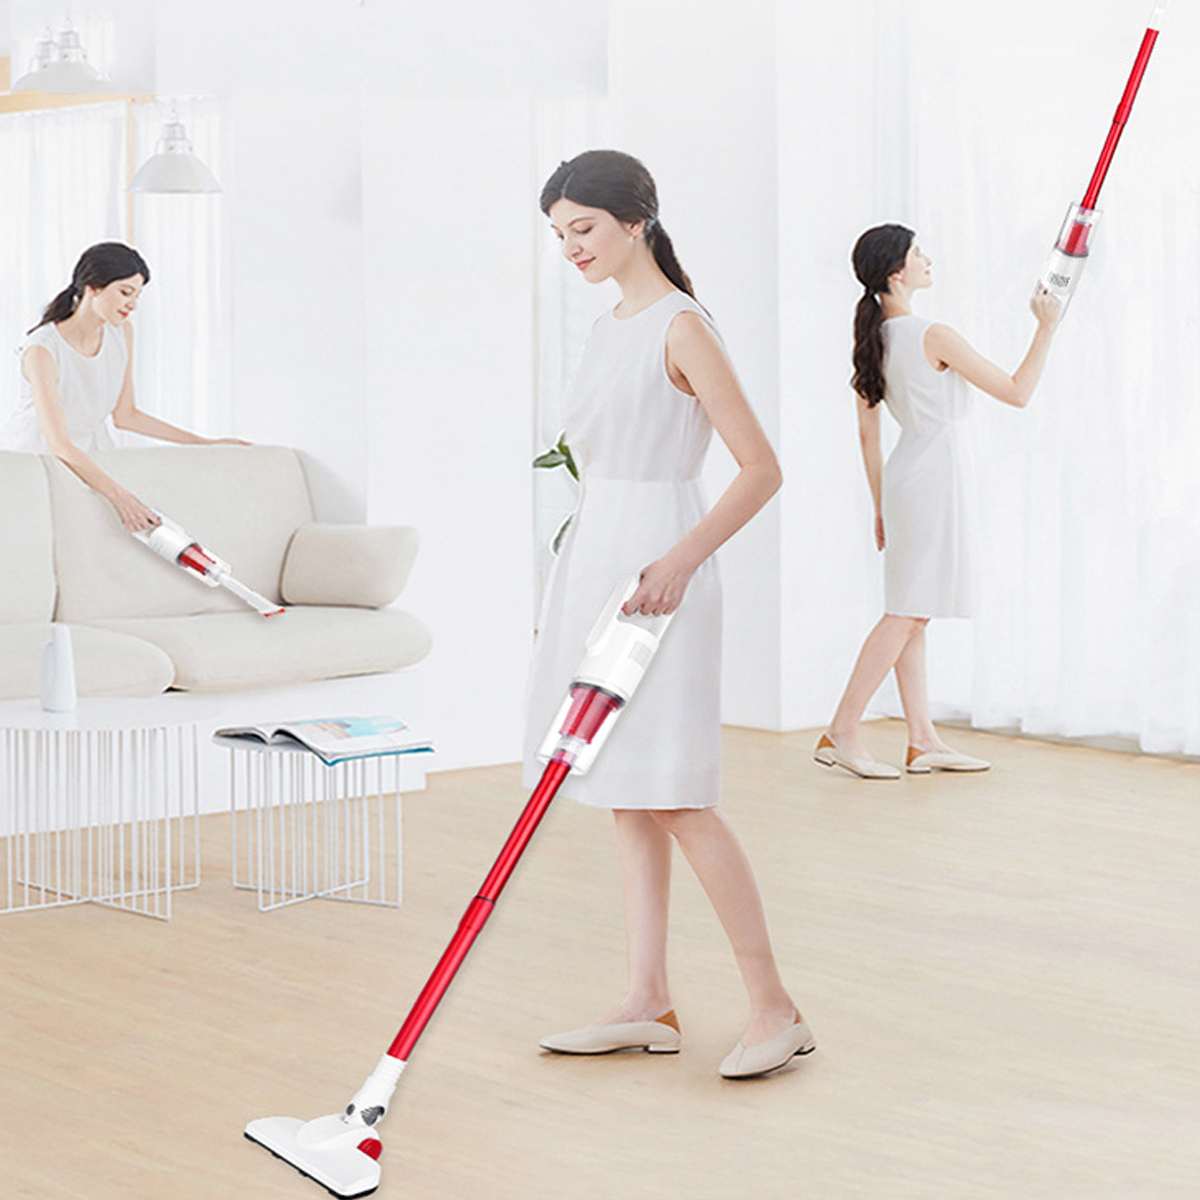 2 In 1 Portable Handheld Cordless Vacuum Cleaner 12000Pa Strong Suction Dust Collector Stick Aspirator Led Light Stick Handheld